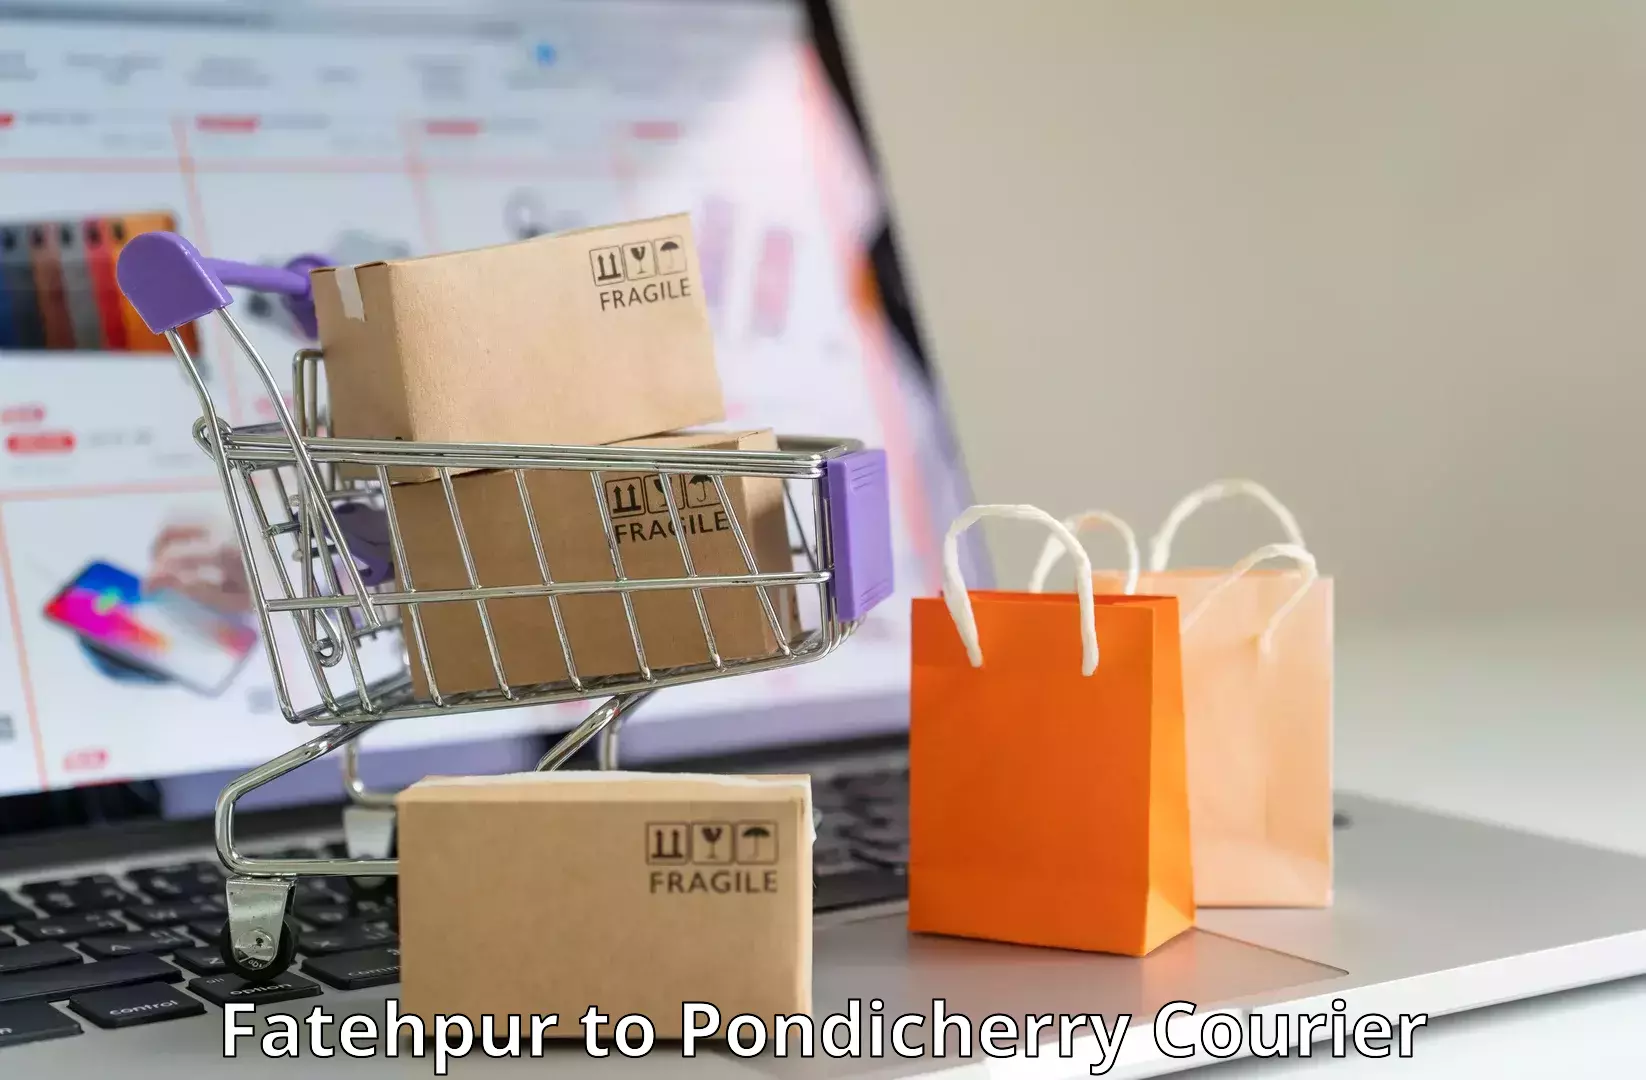 User-friendly delivery service Fatehpur to Metttupalayam